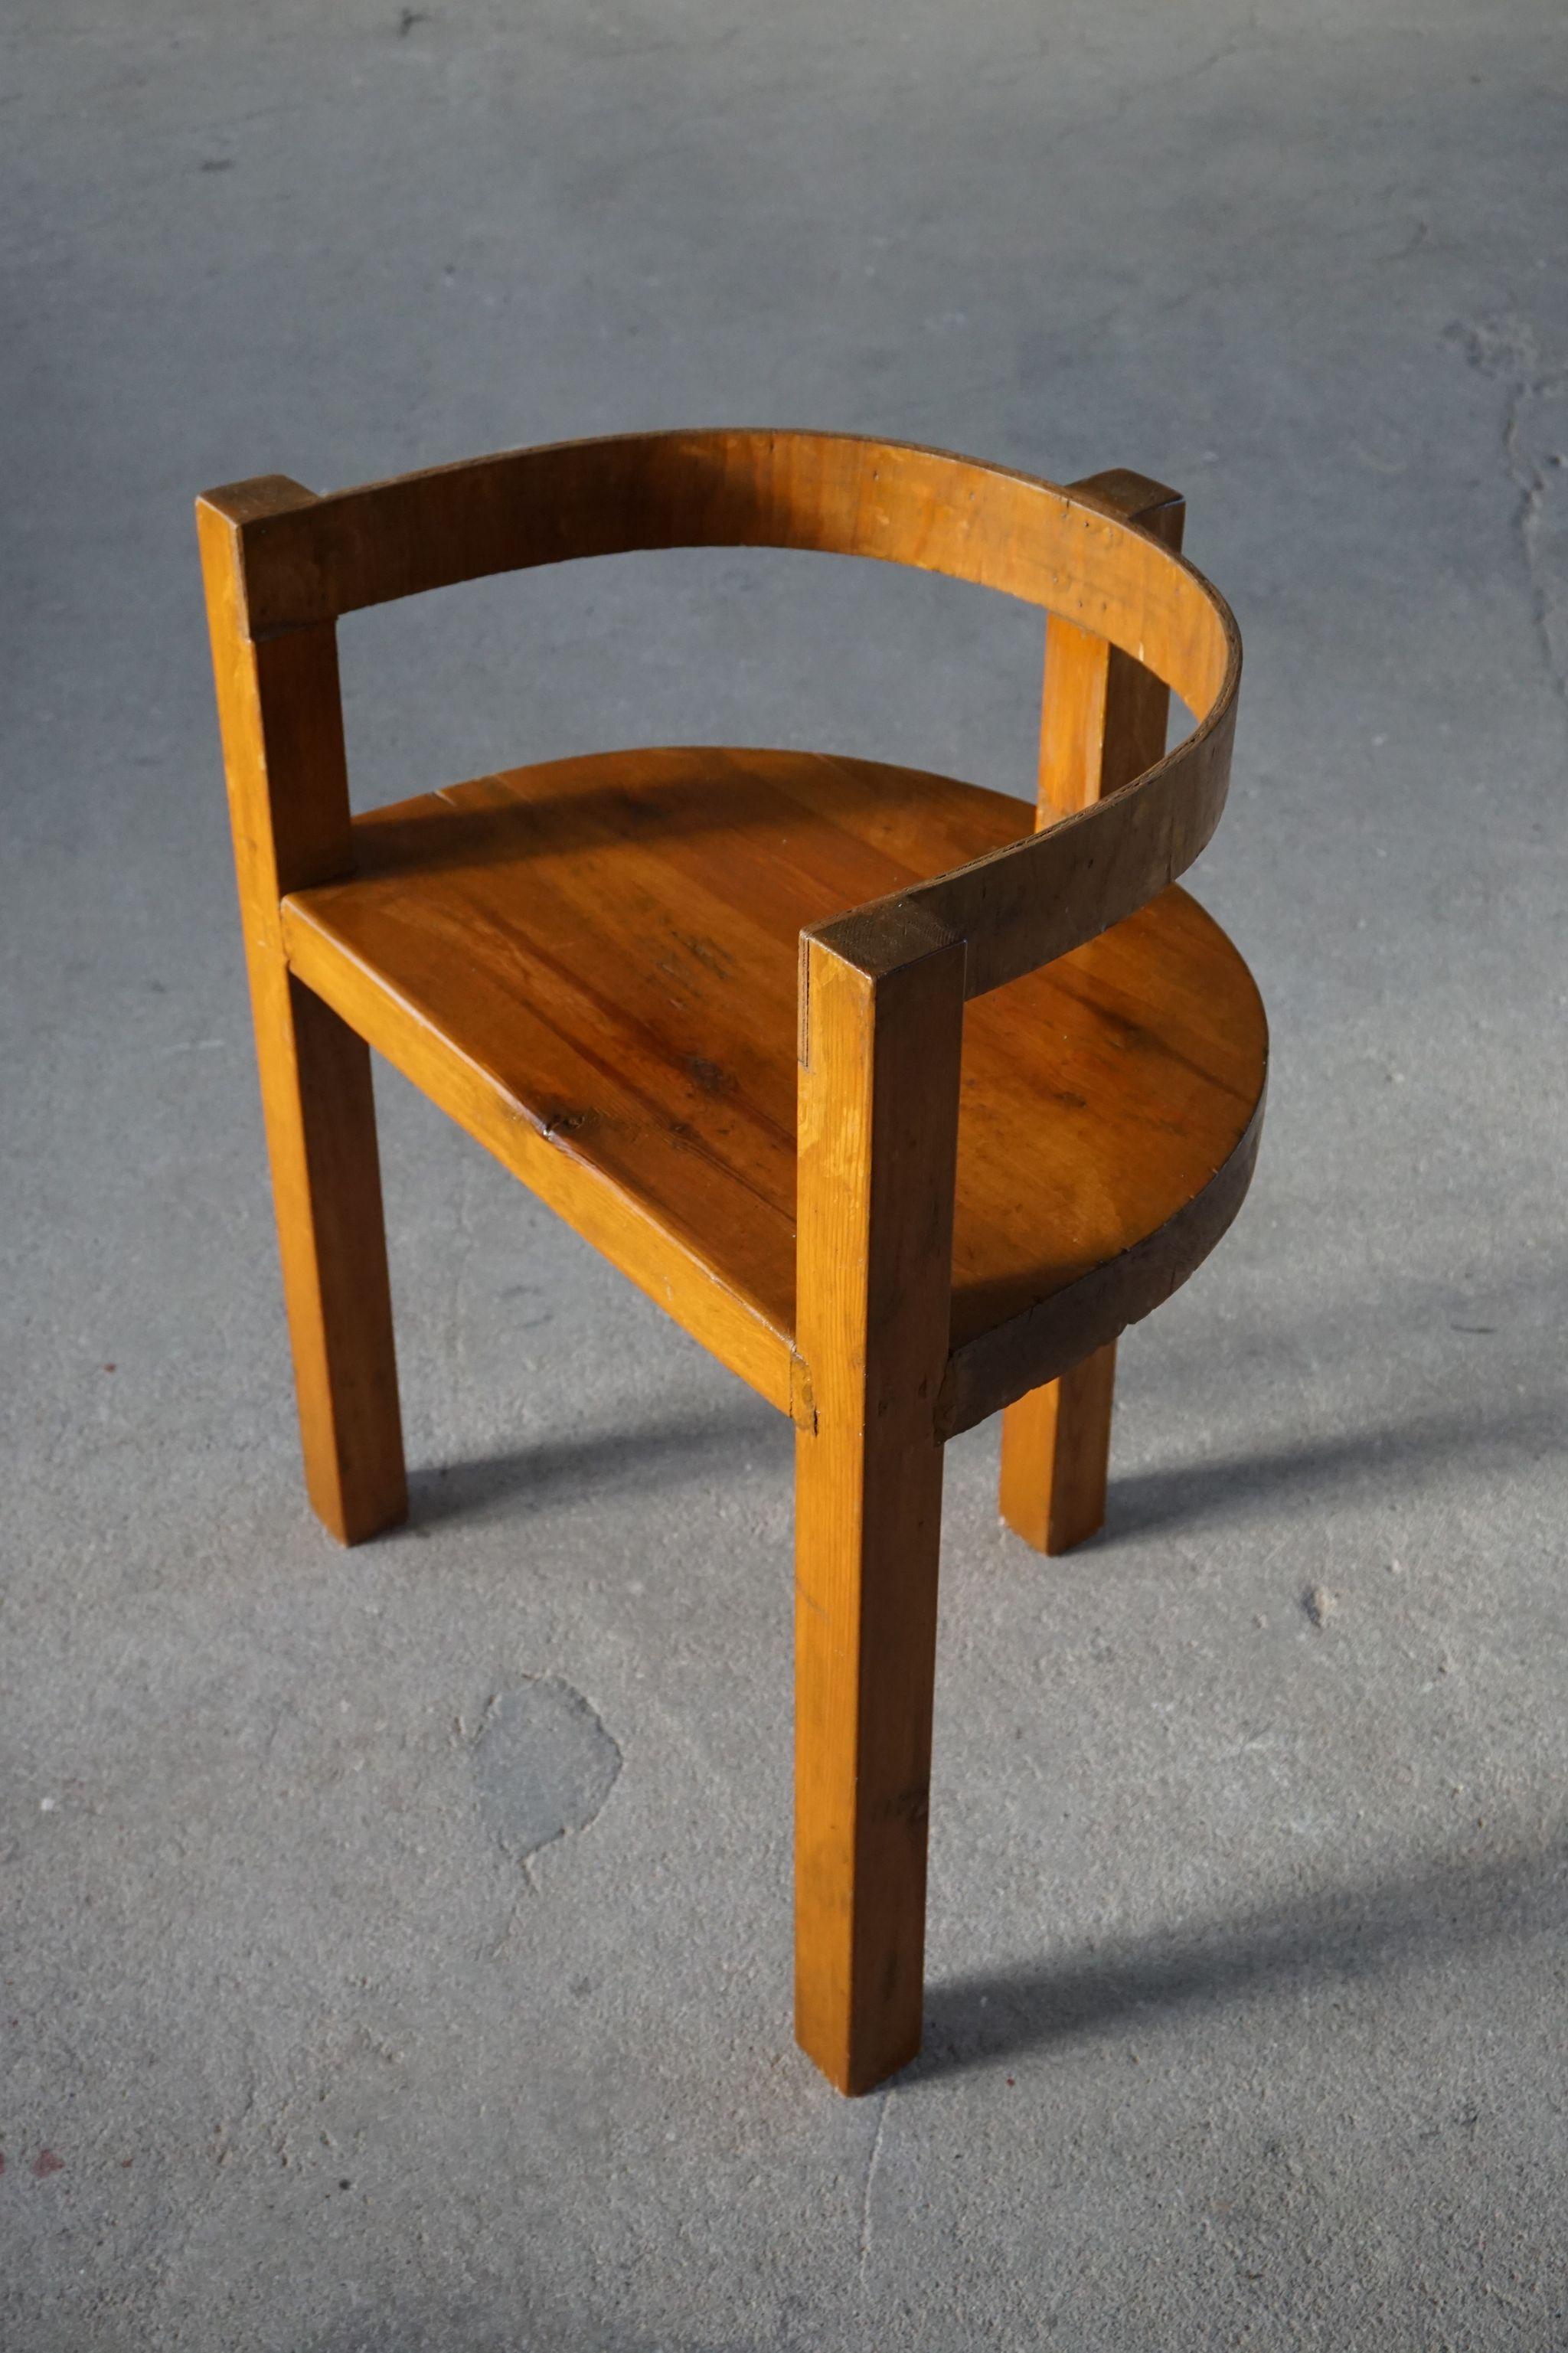 Decorative chair in pine, ca 1930s.
Made by a swedish cabinetmaker. 

Honorable mentions in similar style include Roland Wilhelmsson, Pierre Chapo, and Axel Einar Hjorth.